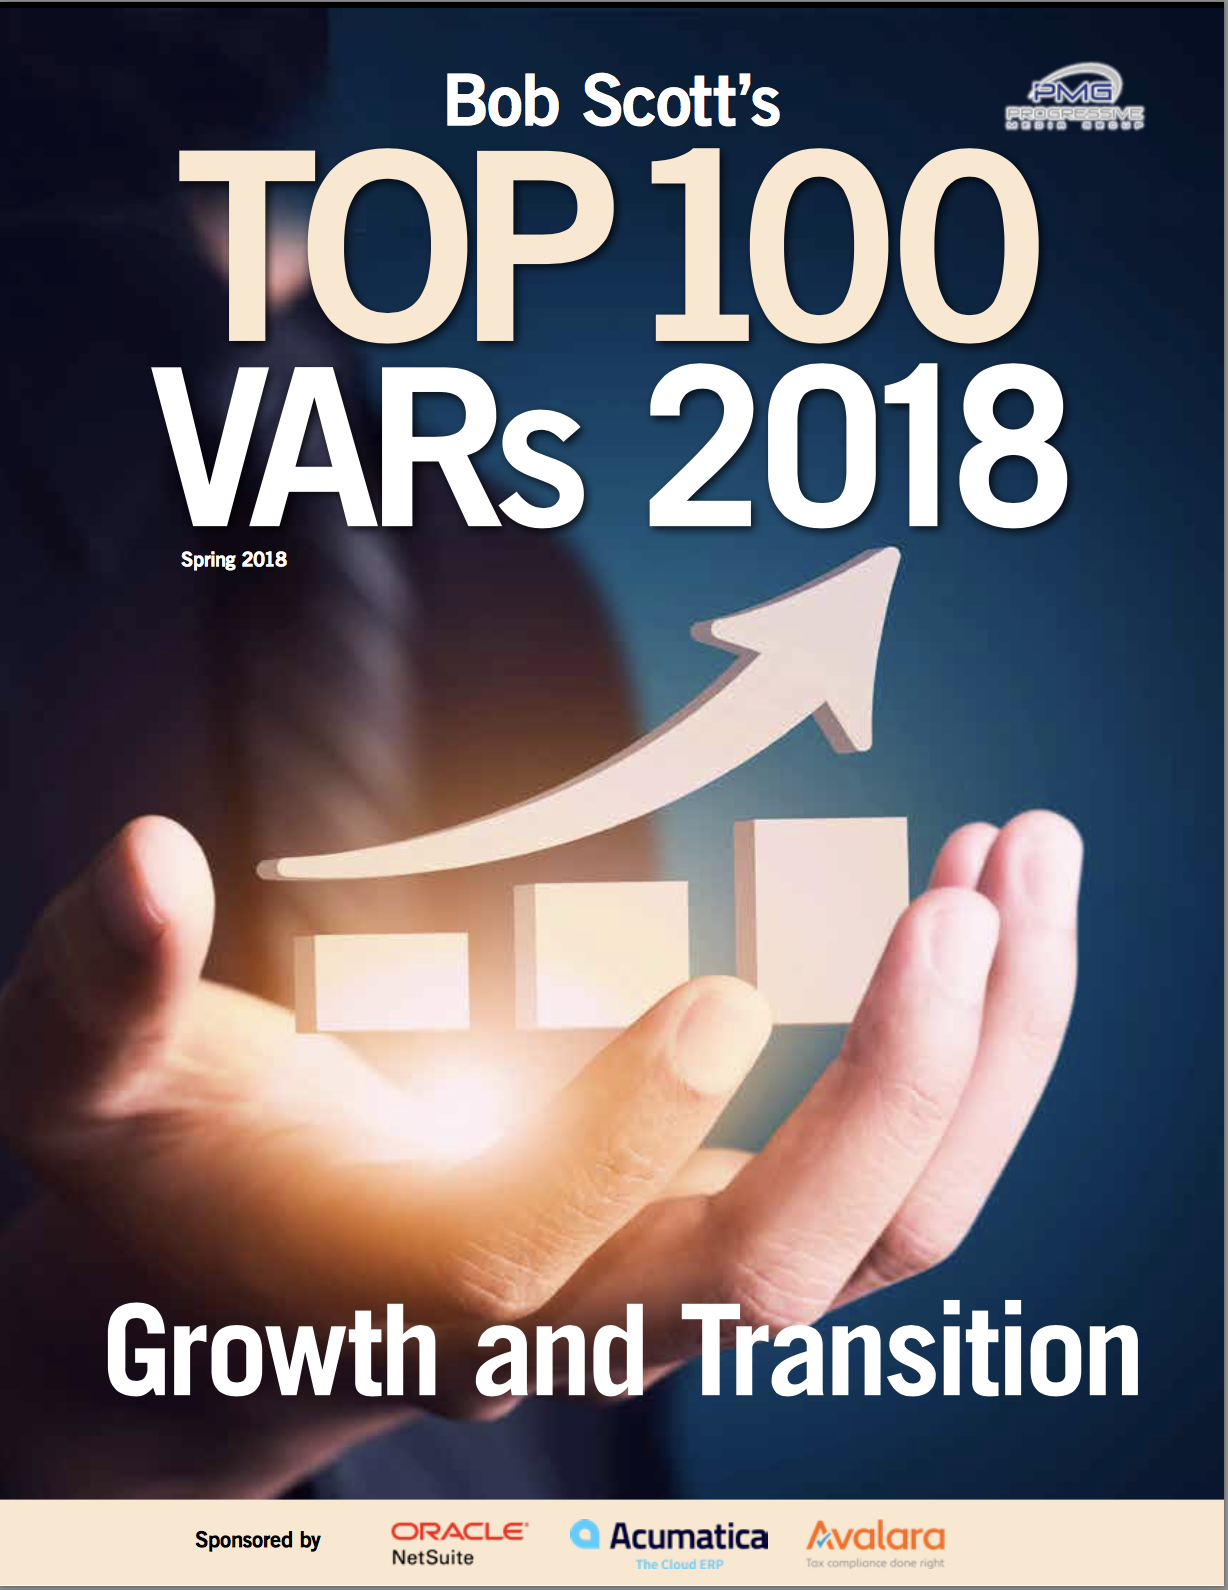 CompuData is recognized by Bob Scott's Top 100 VARs 2018.